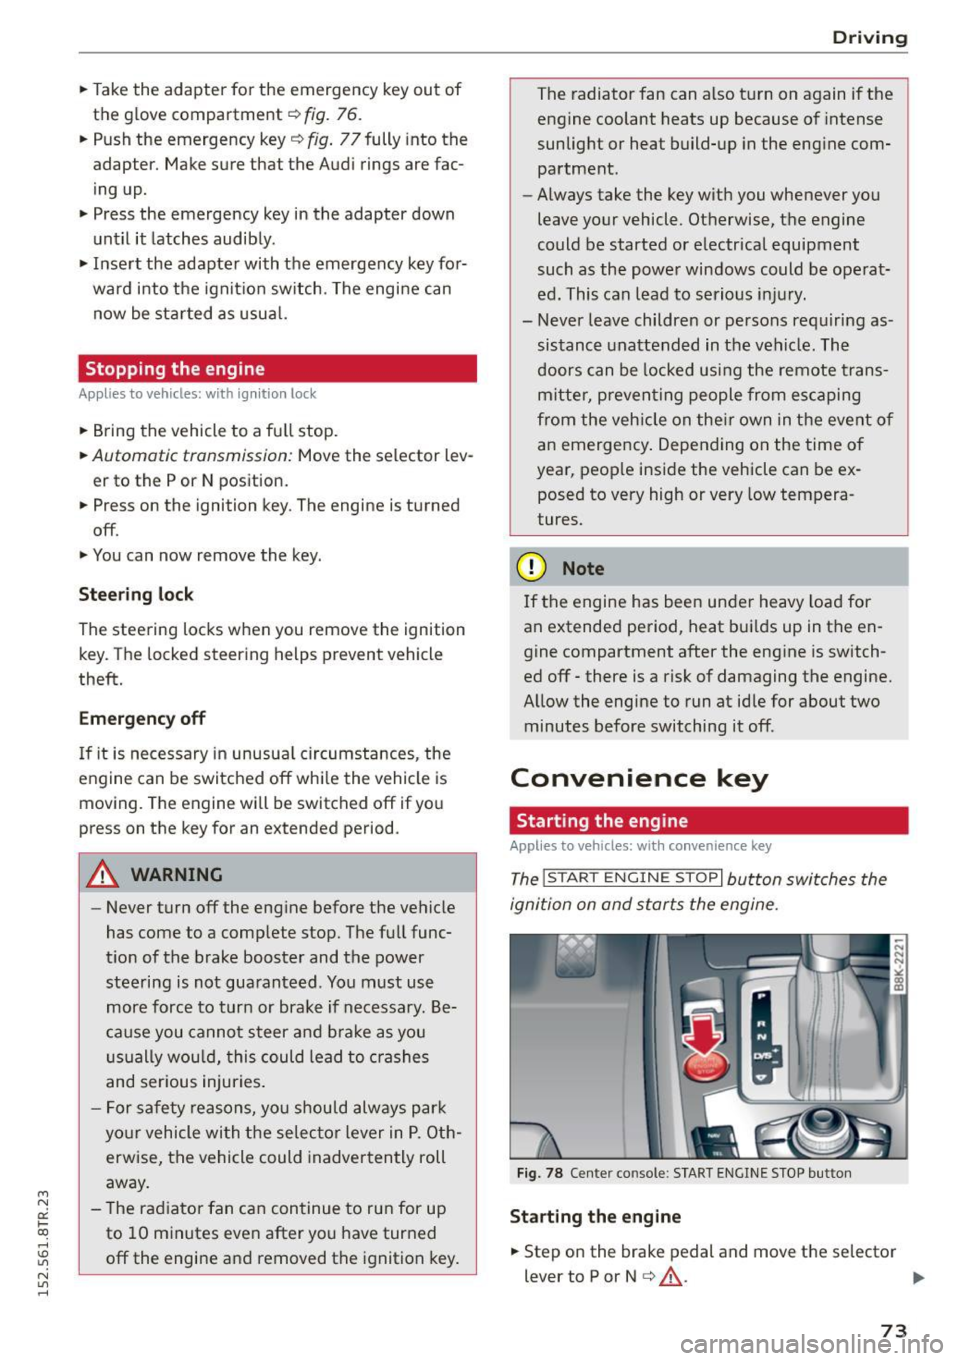 AUDI RS5 COUPE 2015  Owners Manual " N 
0:: l­oo 
rl I.O 
" N 
" rl 
.. Take  the  adapter  for  the  emergency  key out  of 
the  glove  compartment 
r=:>  fig. 76. 
..  Push the  emergency  key 
r=:> fig. 77fully  into the 
adapt